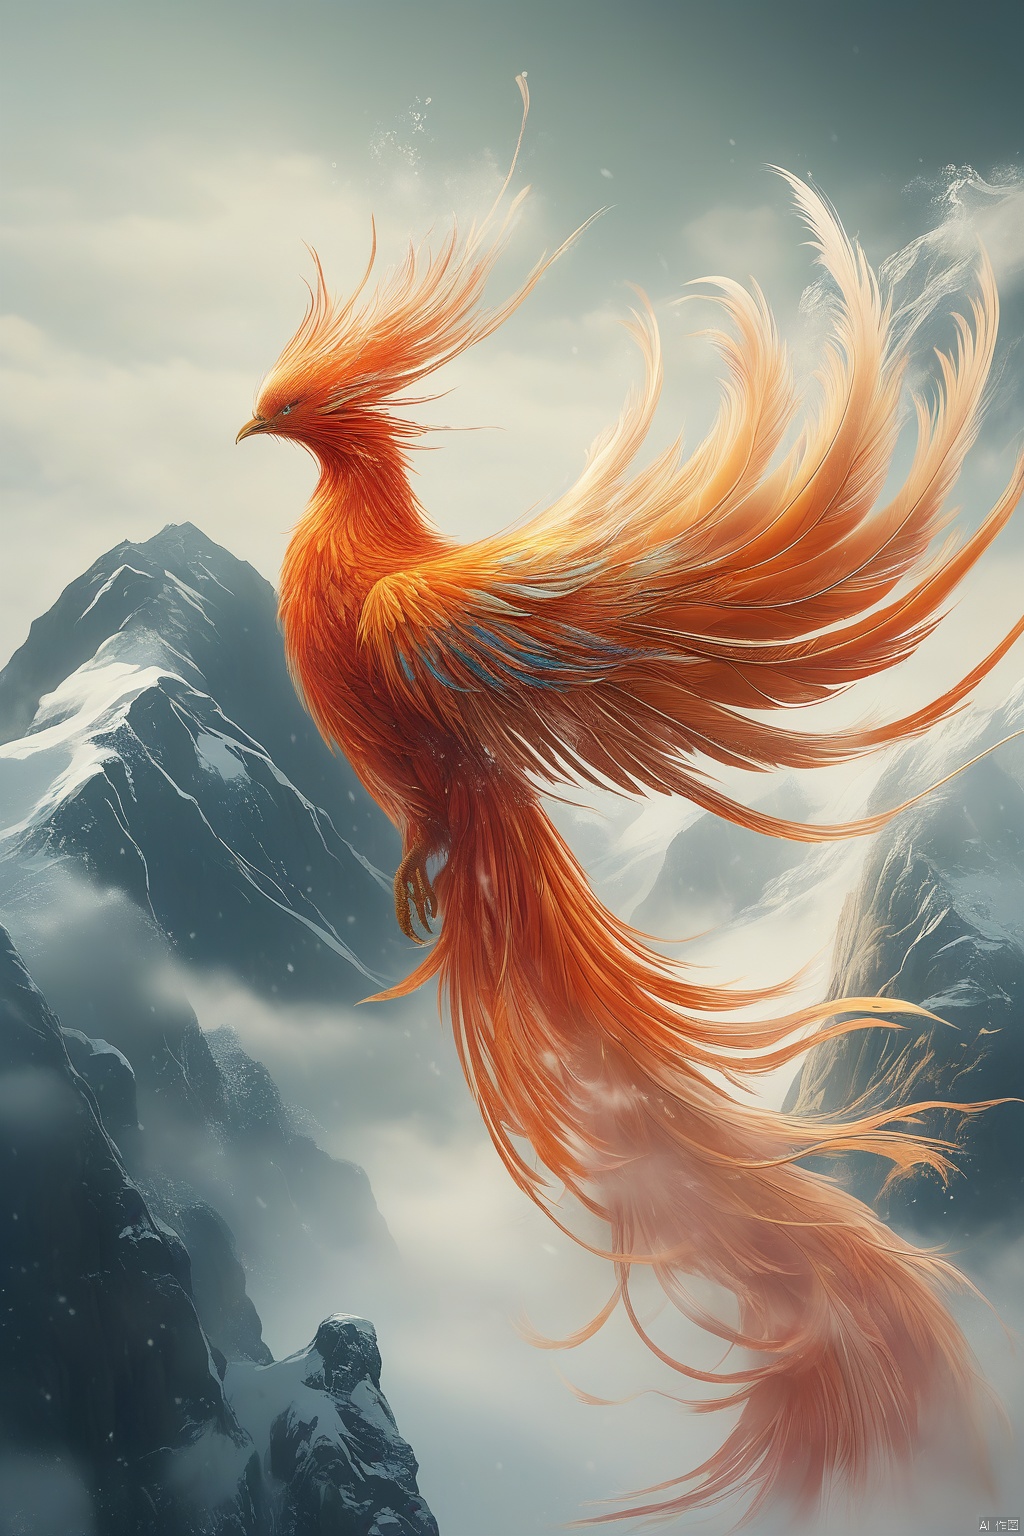  A phoenix formed by ice water, with slender tail feathers fluttering in the wind. Mist covers part of the phoenix's body, and the background is a snowy mountain